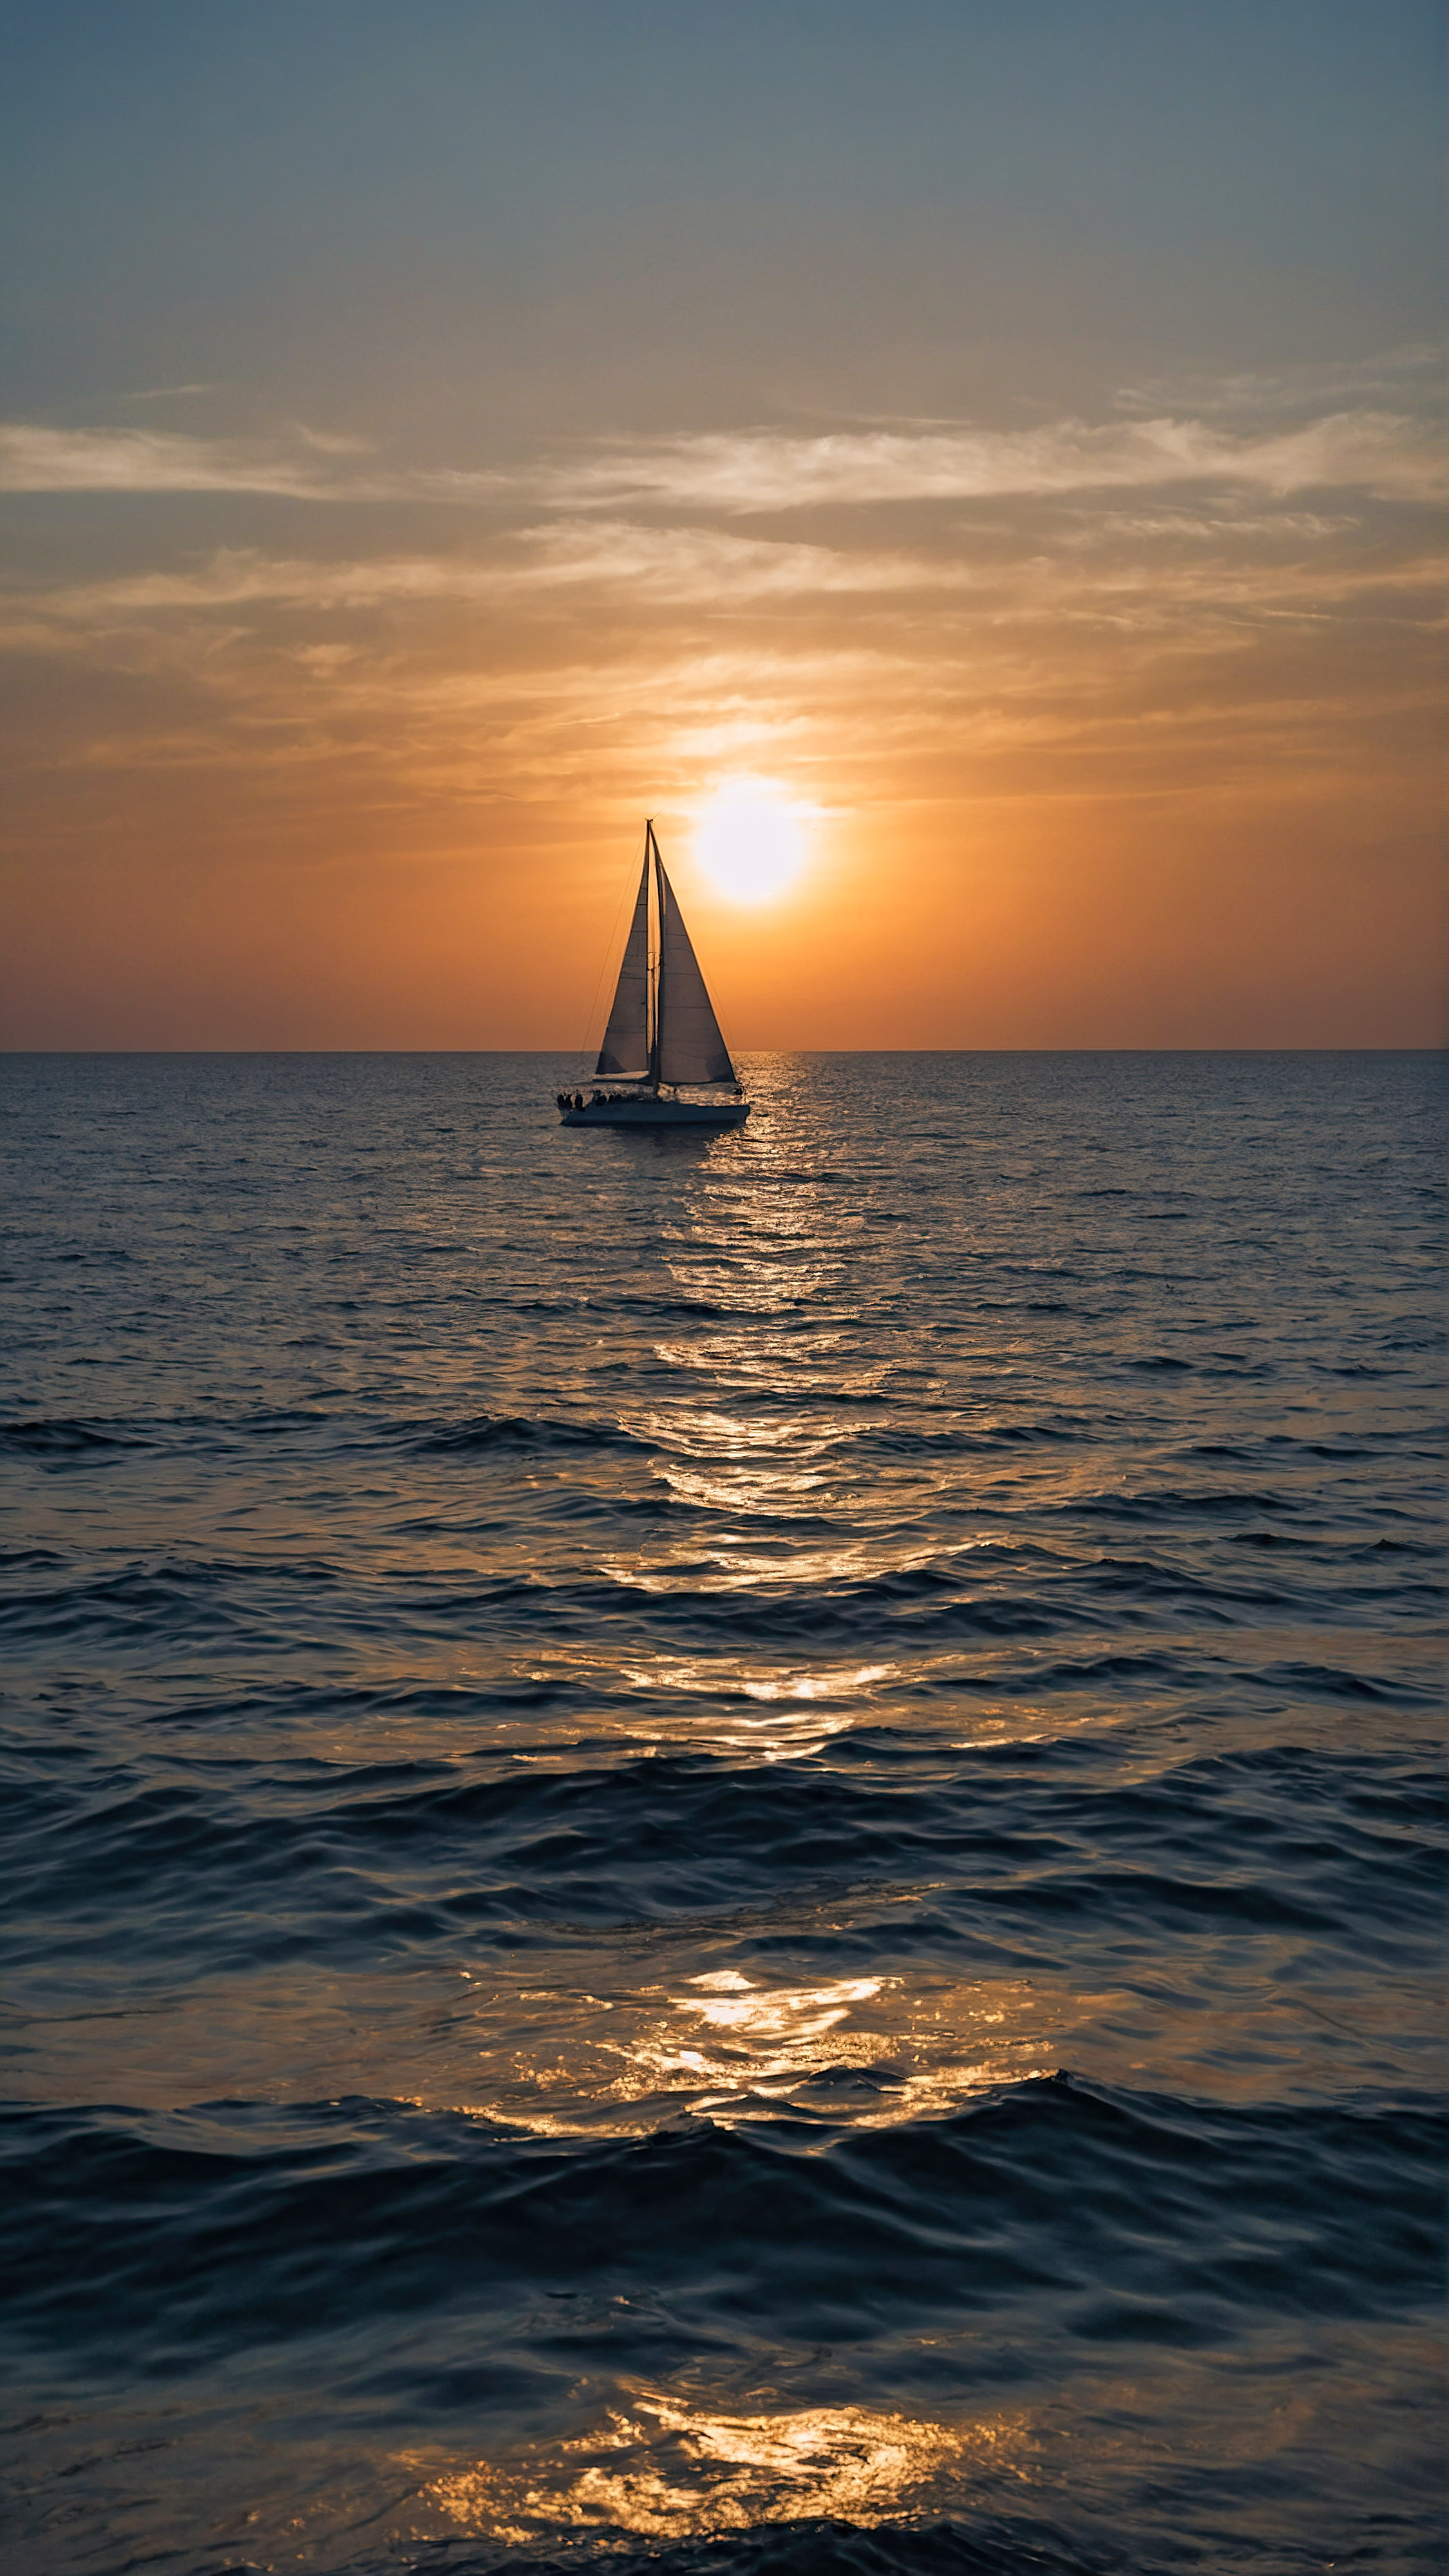 Bring the beauty of the ocean to your device with an aesthetic wallpaper, depicting a serene view of the ocean under a gradient sunset sky with the silhouette of a distant sailboat.